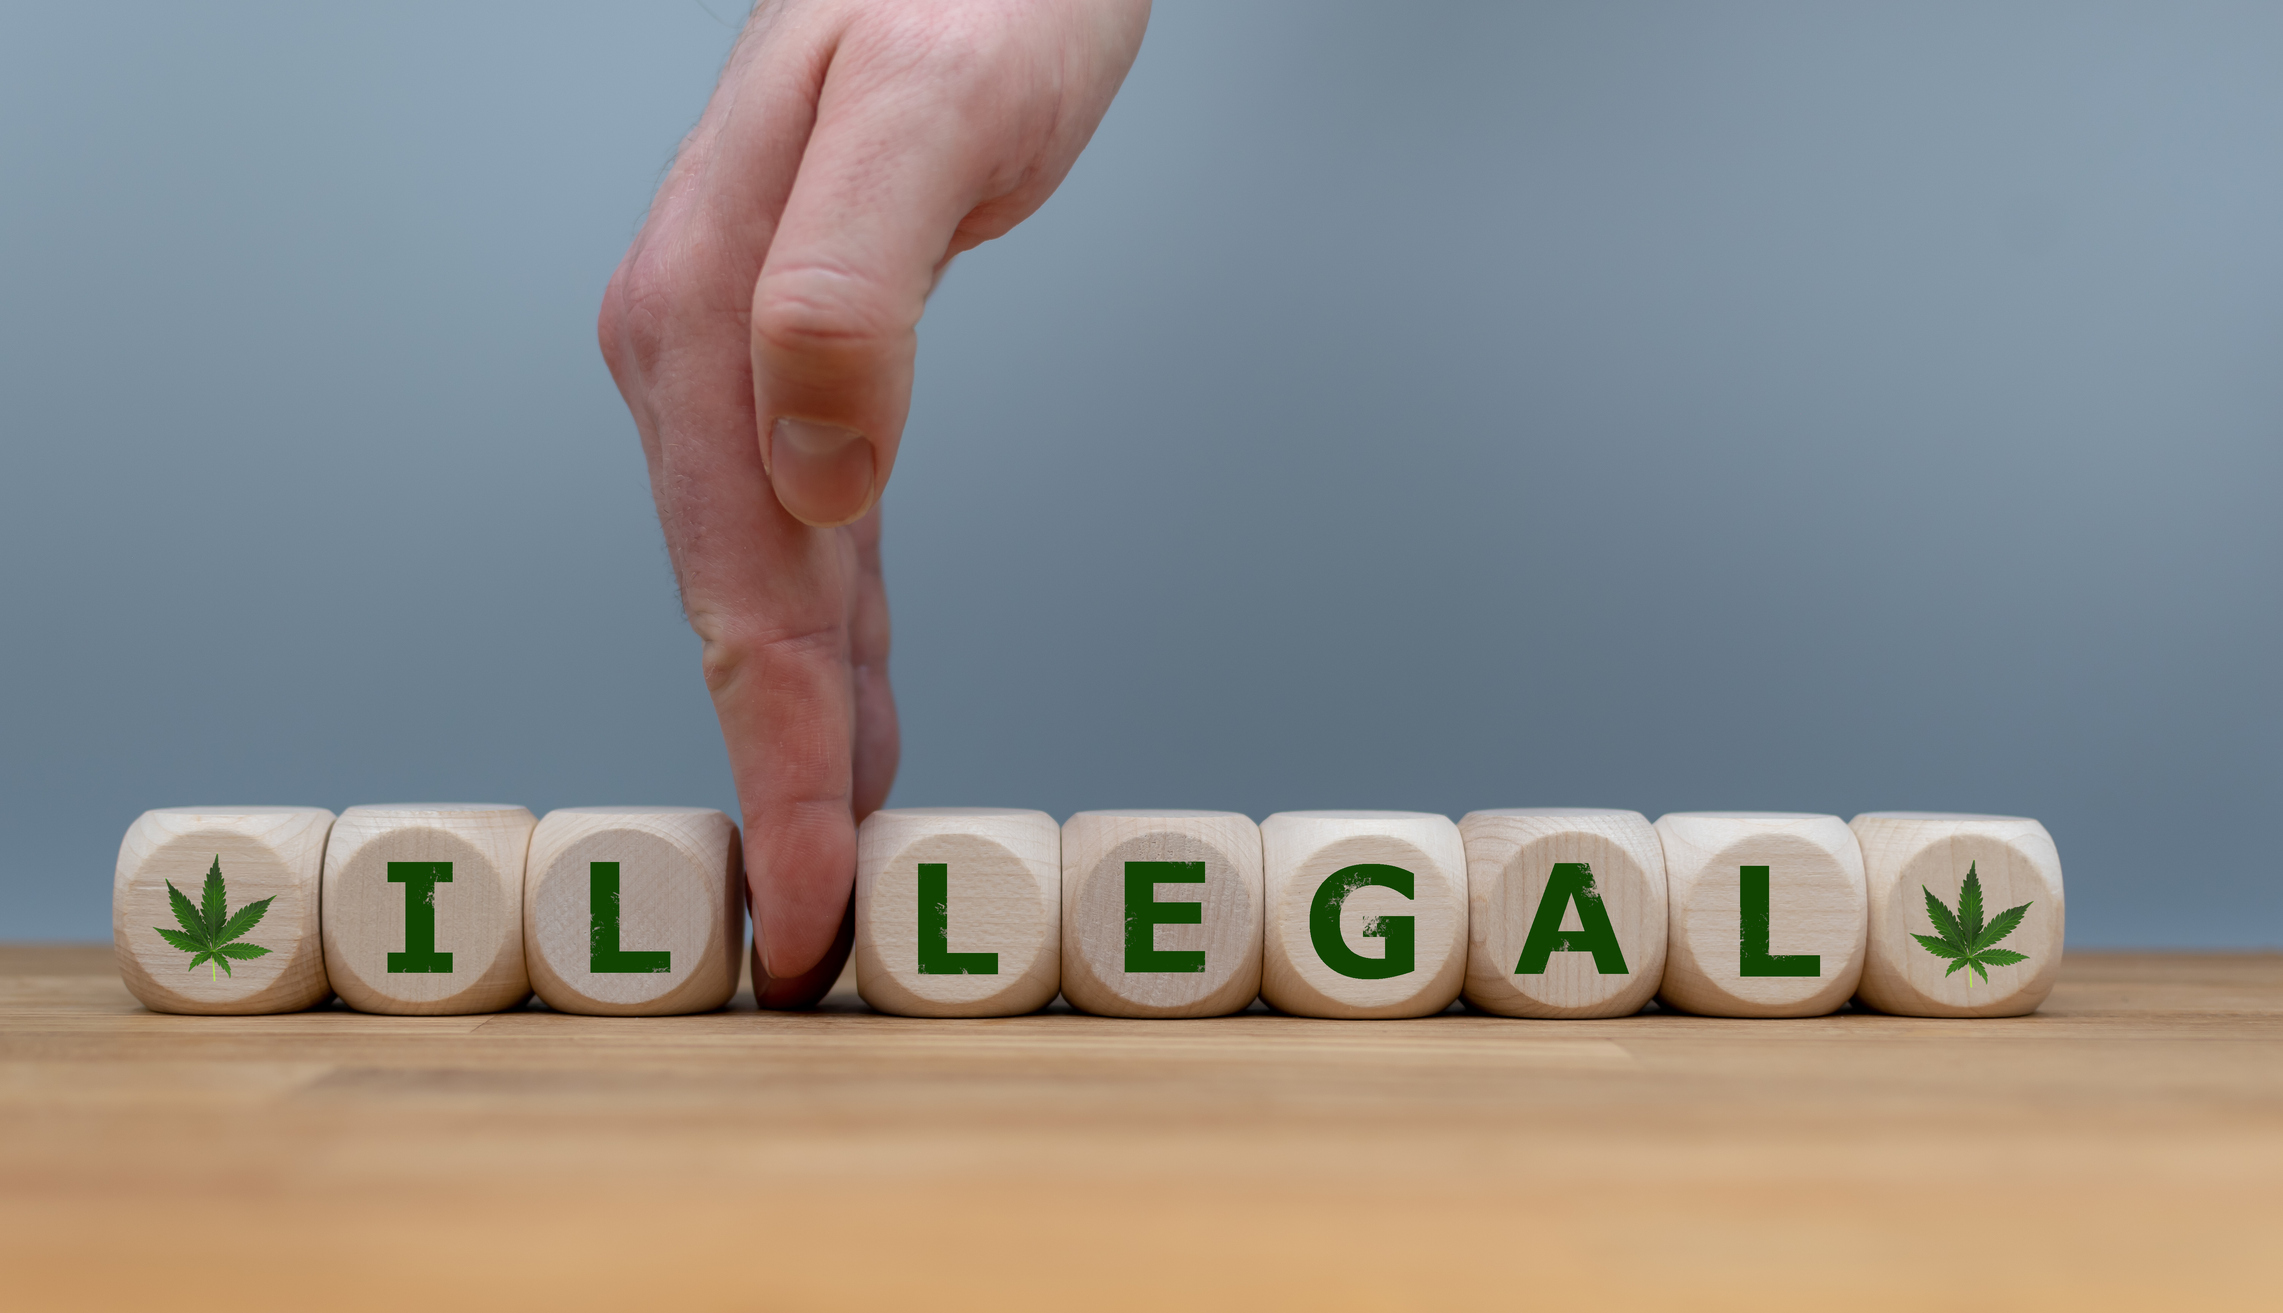 Dice form the word "ILLEGAL" while a hand separates the letters "IL" in order to change the word to "LEGAL"